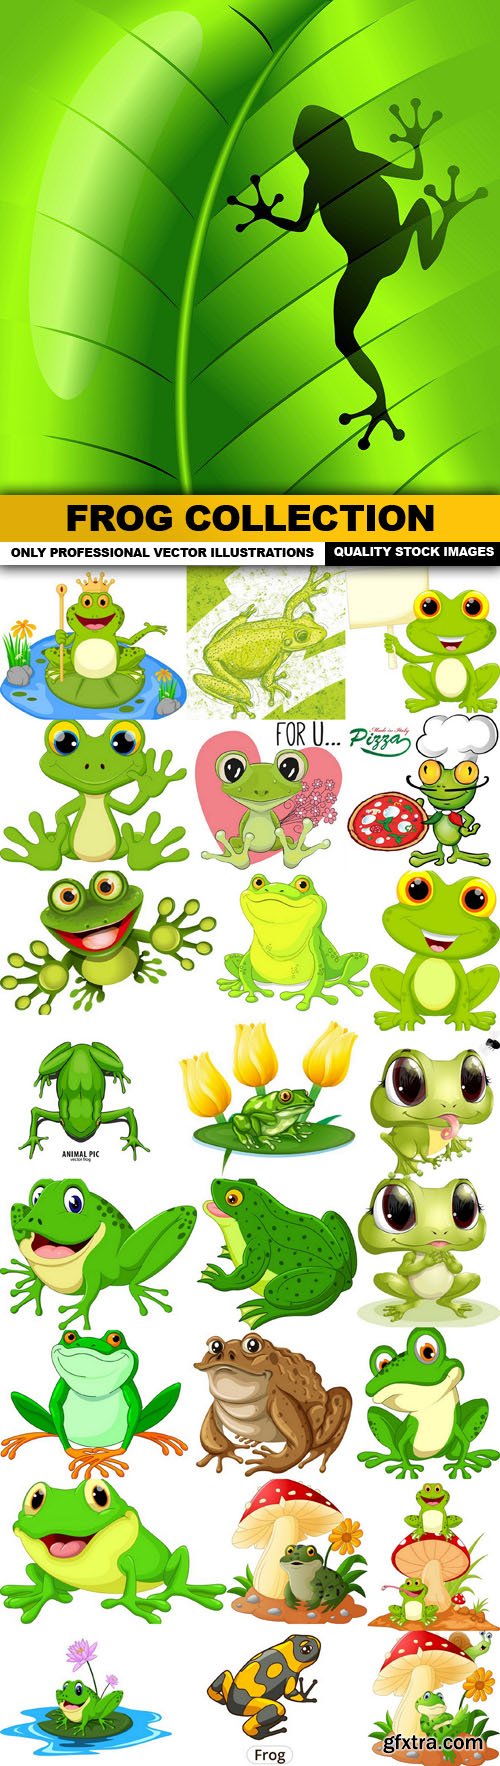 Frog Collection- 25 Vector